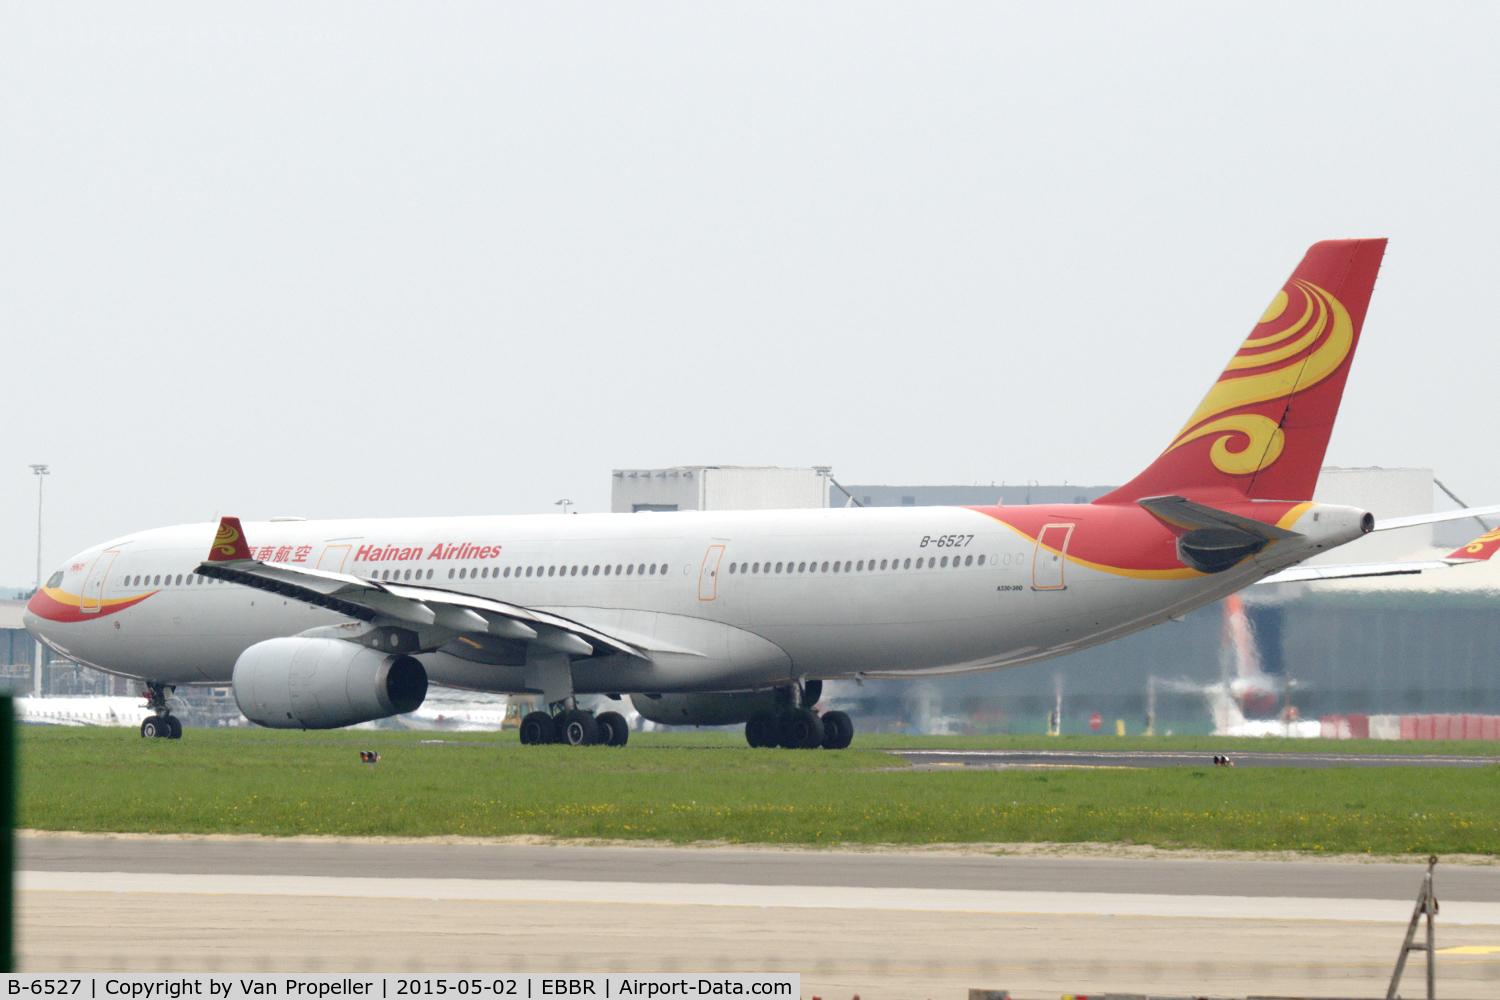 B-6527, 2010 Airbus A330-343X C/N 1178, Hainan Airlines Airbus A330-300 taking off from Brussels Zaventem airport, Belgium.